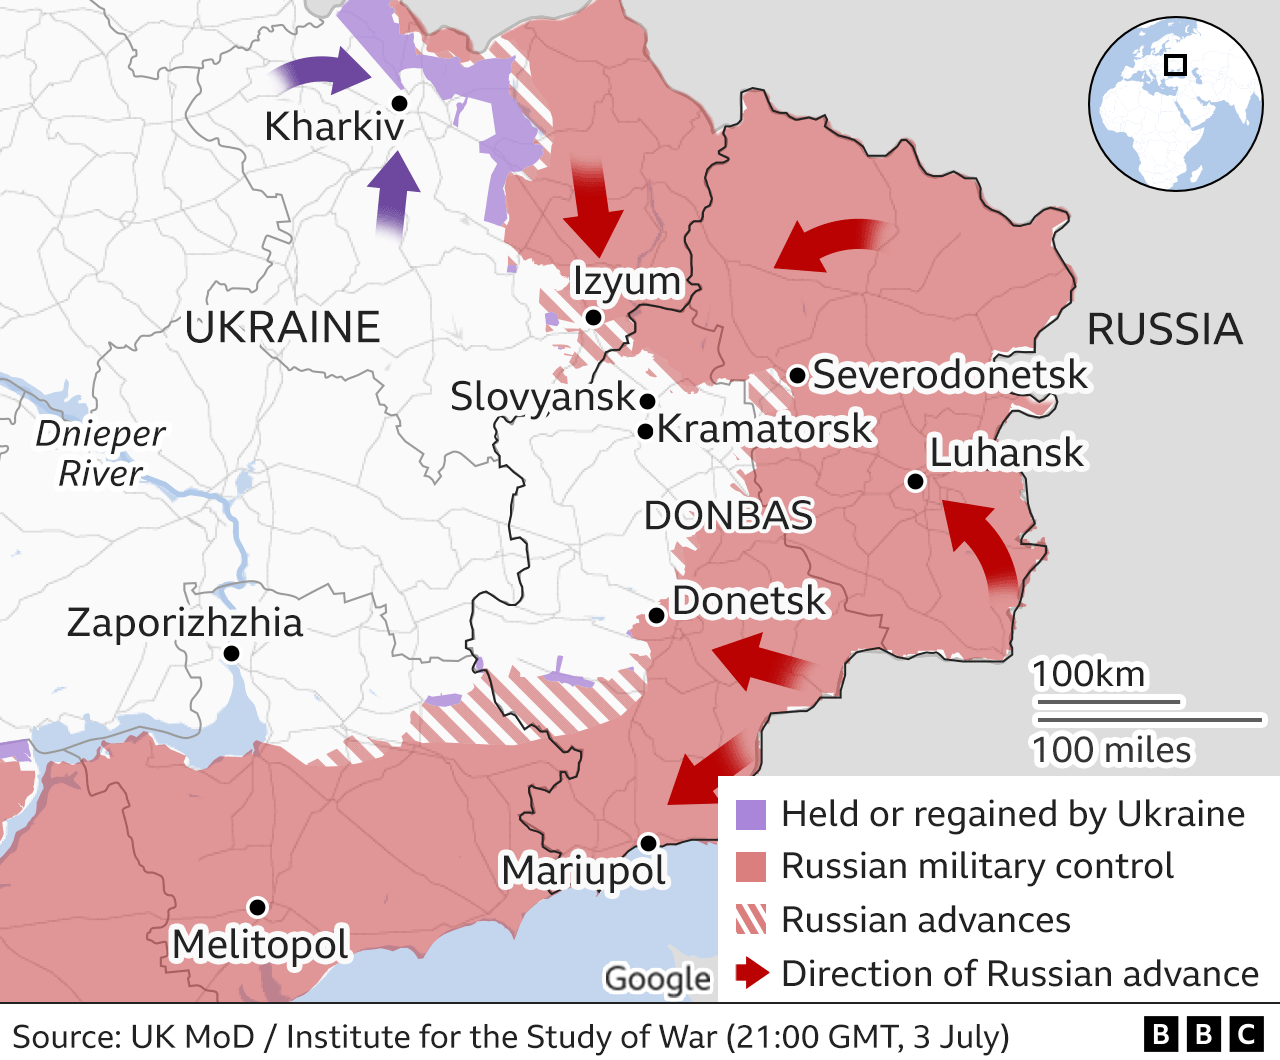 Map of eastern Ukraine, showing Russian areas of control, updated 4 Jul